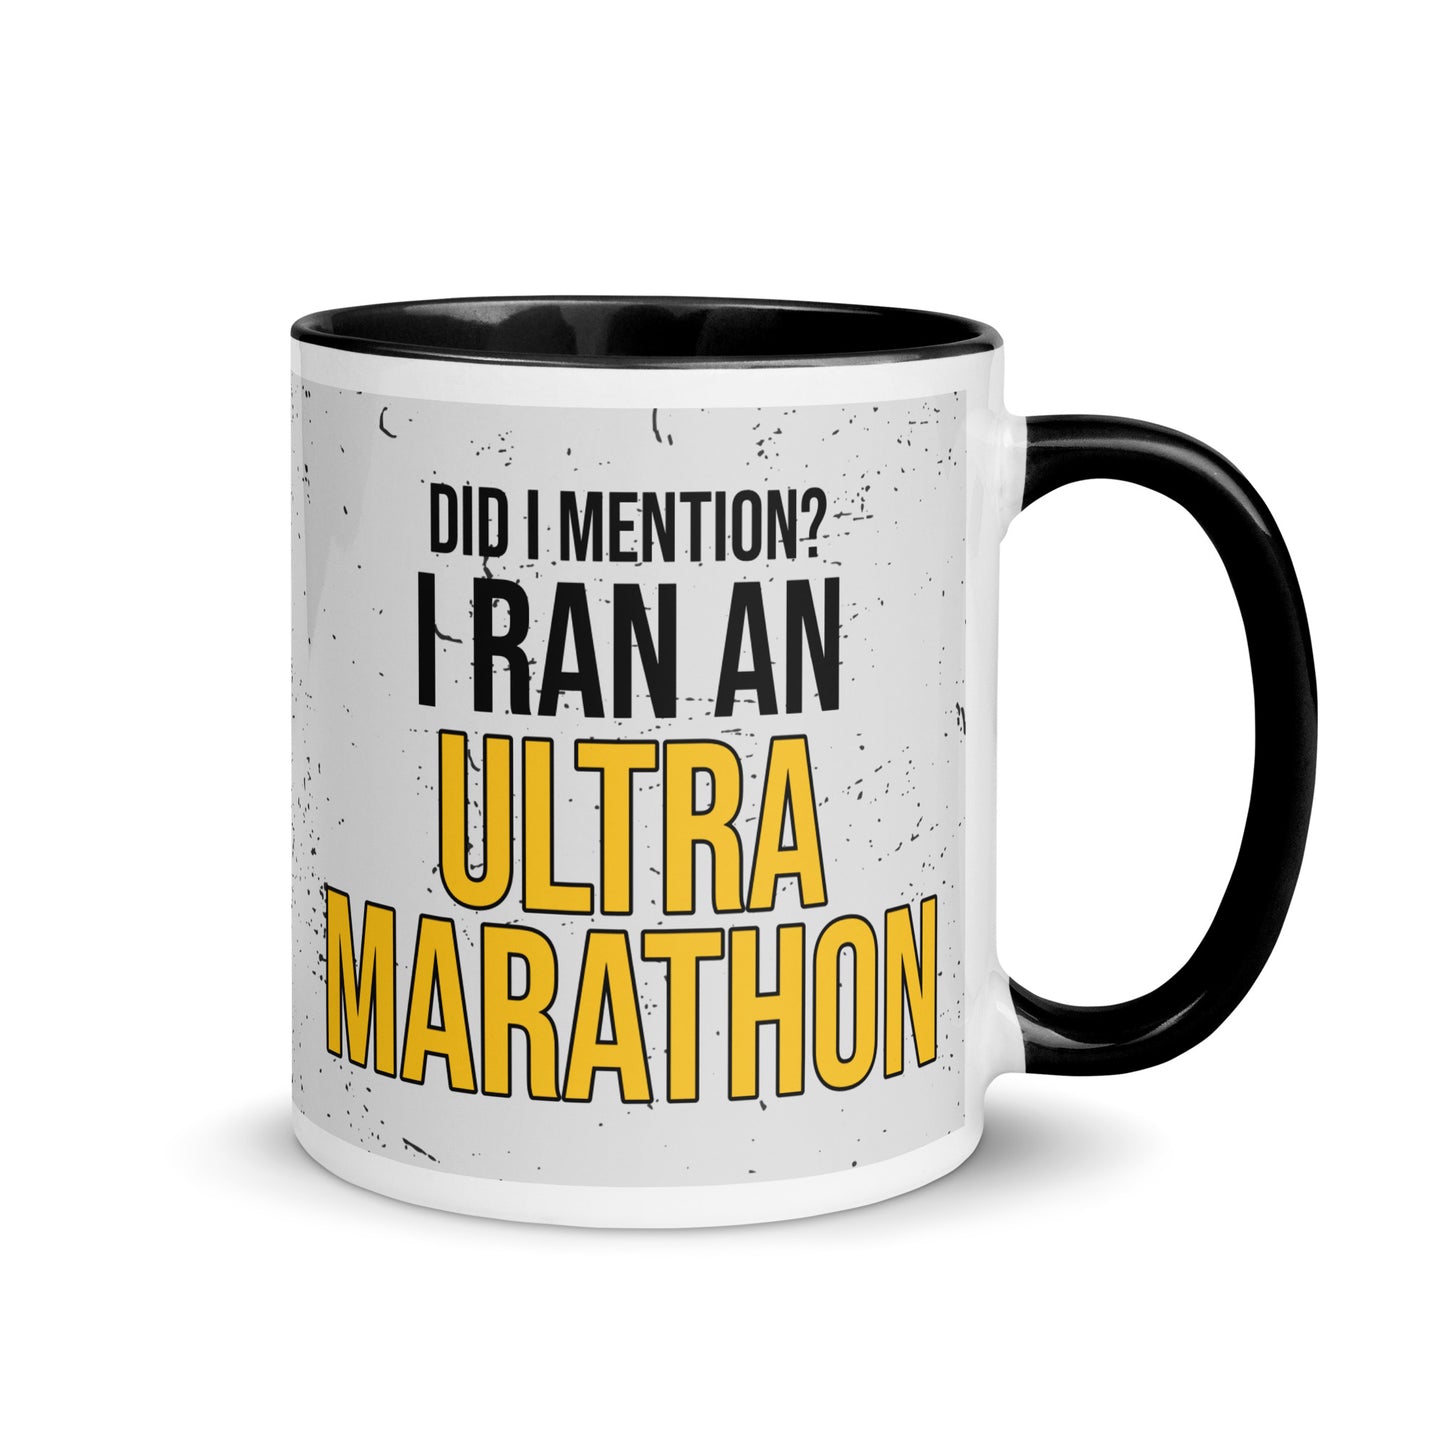 coffee mug with black rim and handle, with a paint splatter design around the mug, and the words Did i mention? i ran an ultra marathon in a bold font. a gift for people who have completed an ultra marathon.  